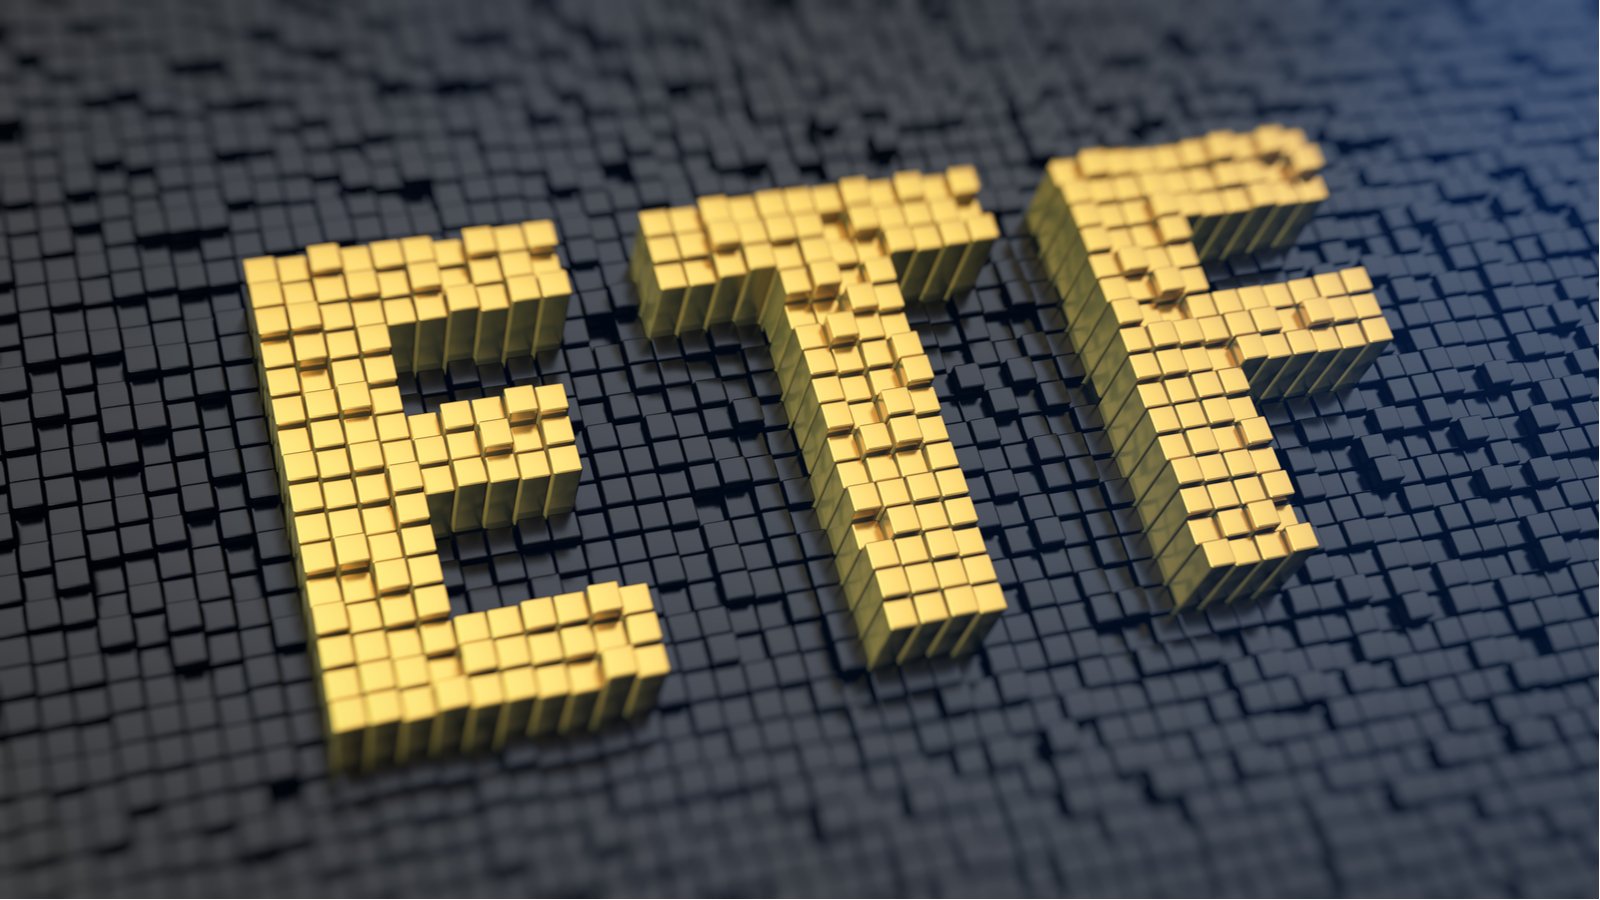 the word "etf" spelled out in many yellow cubes against a background of many black cubes